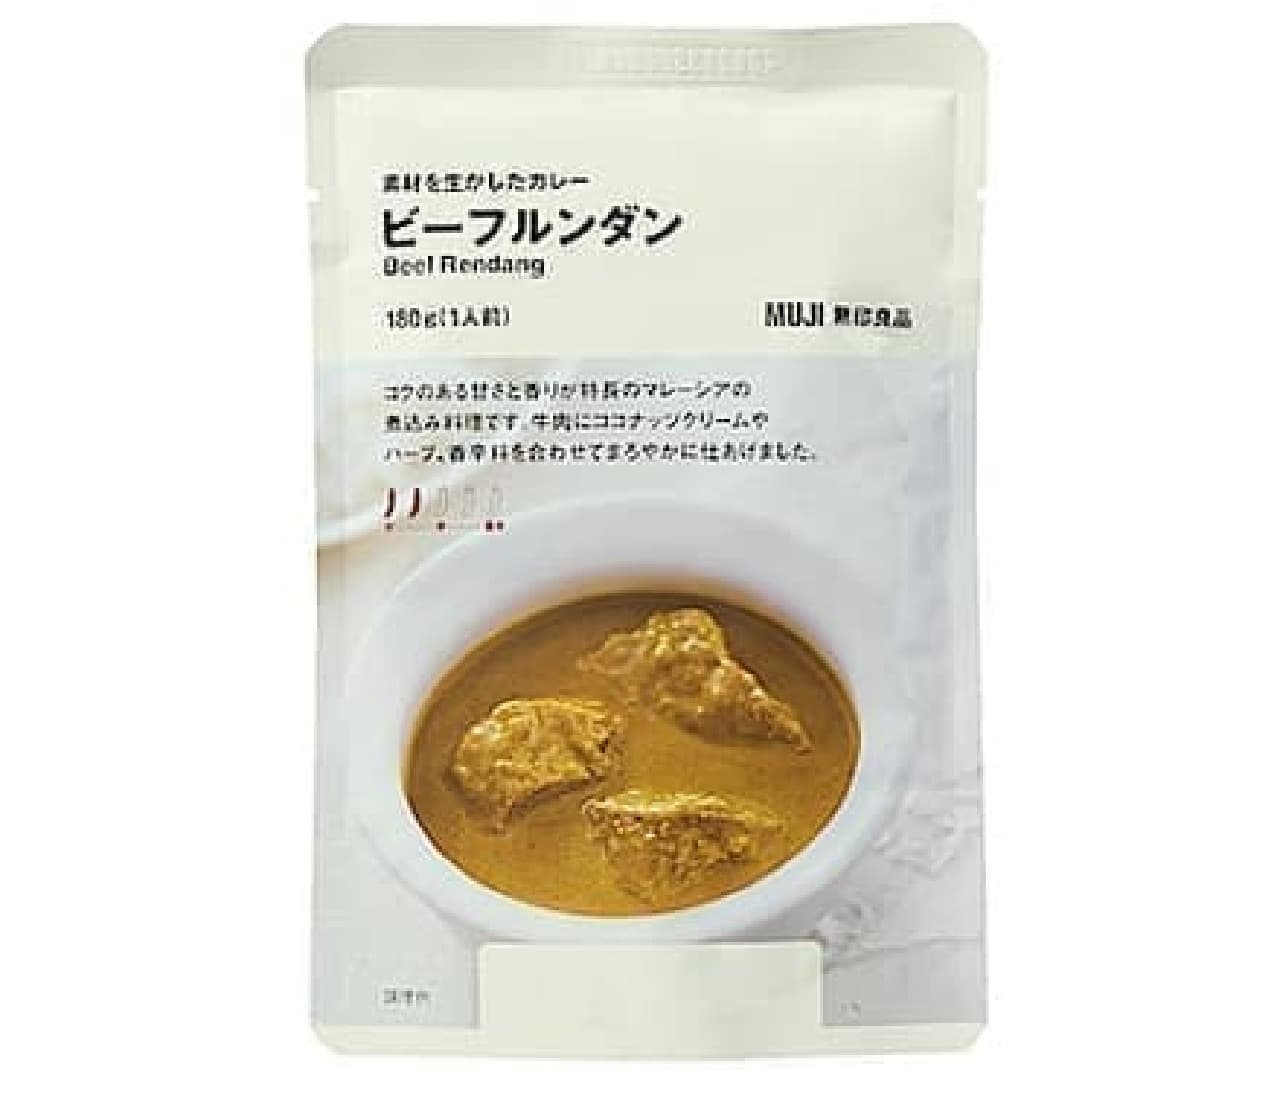 MUJI "Curry Beef Rundum with Ingredients".